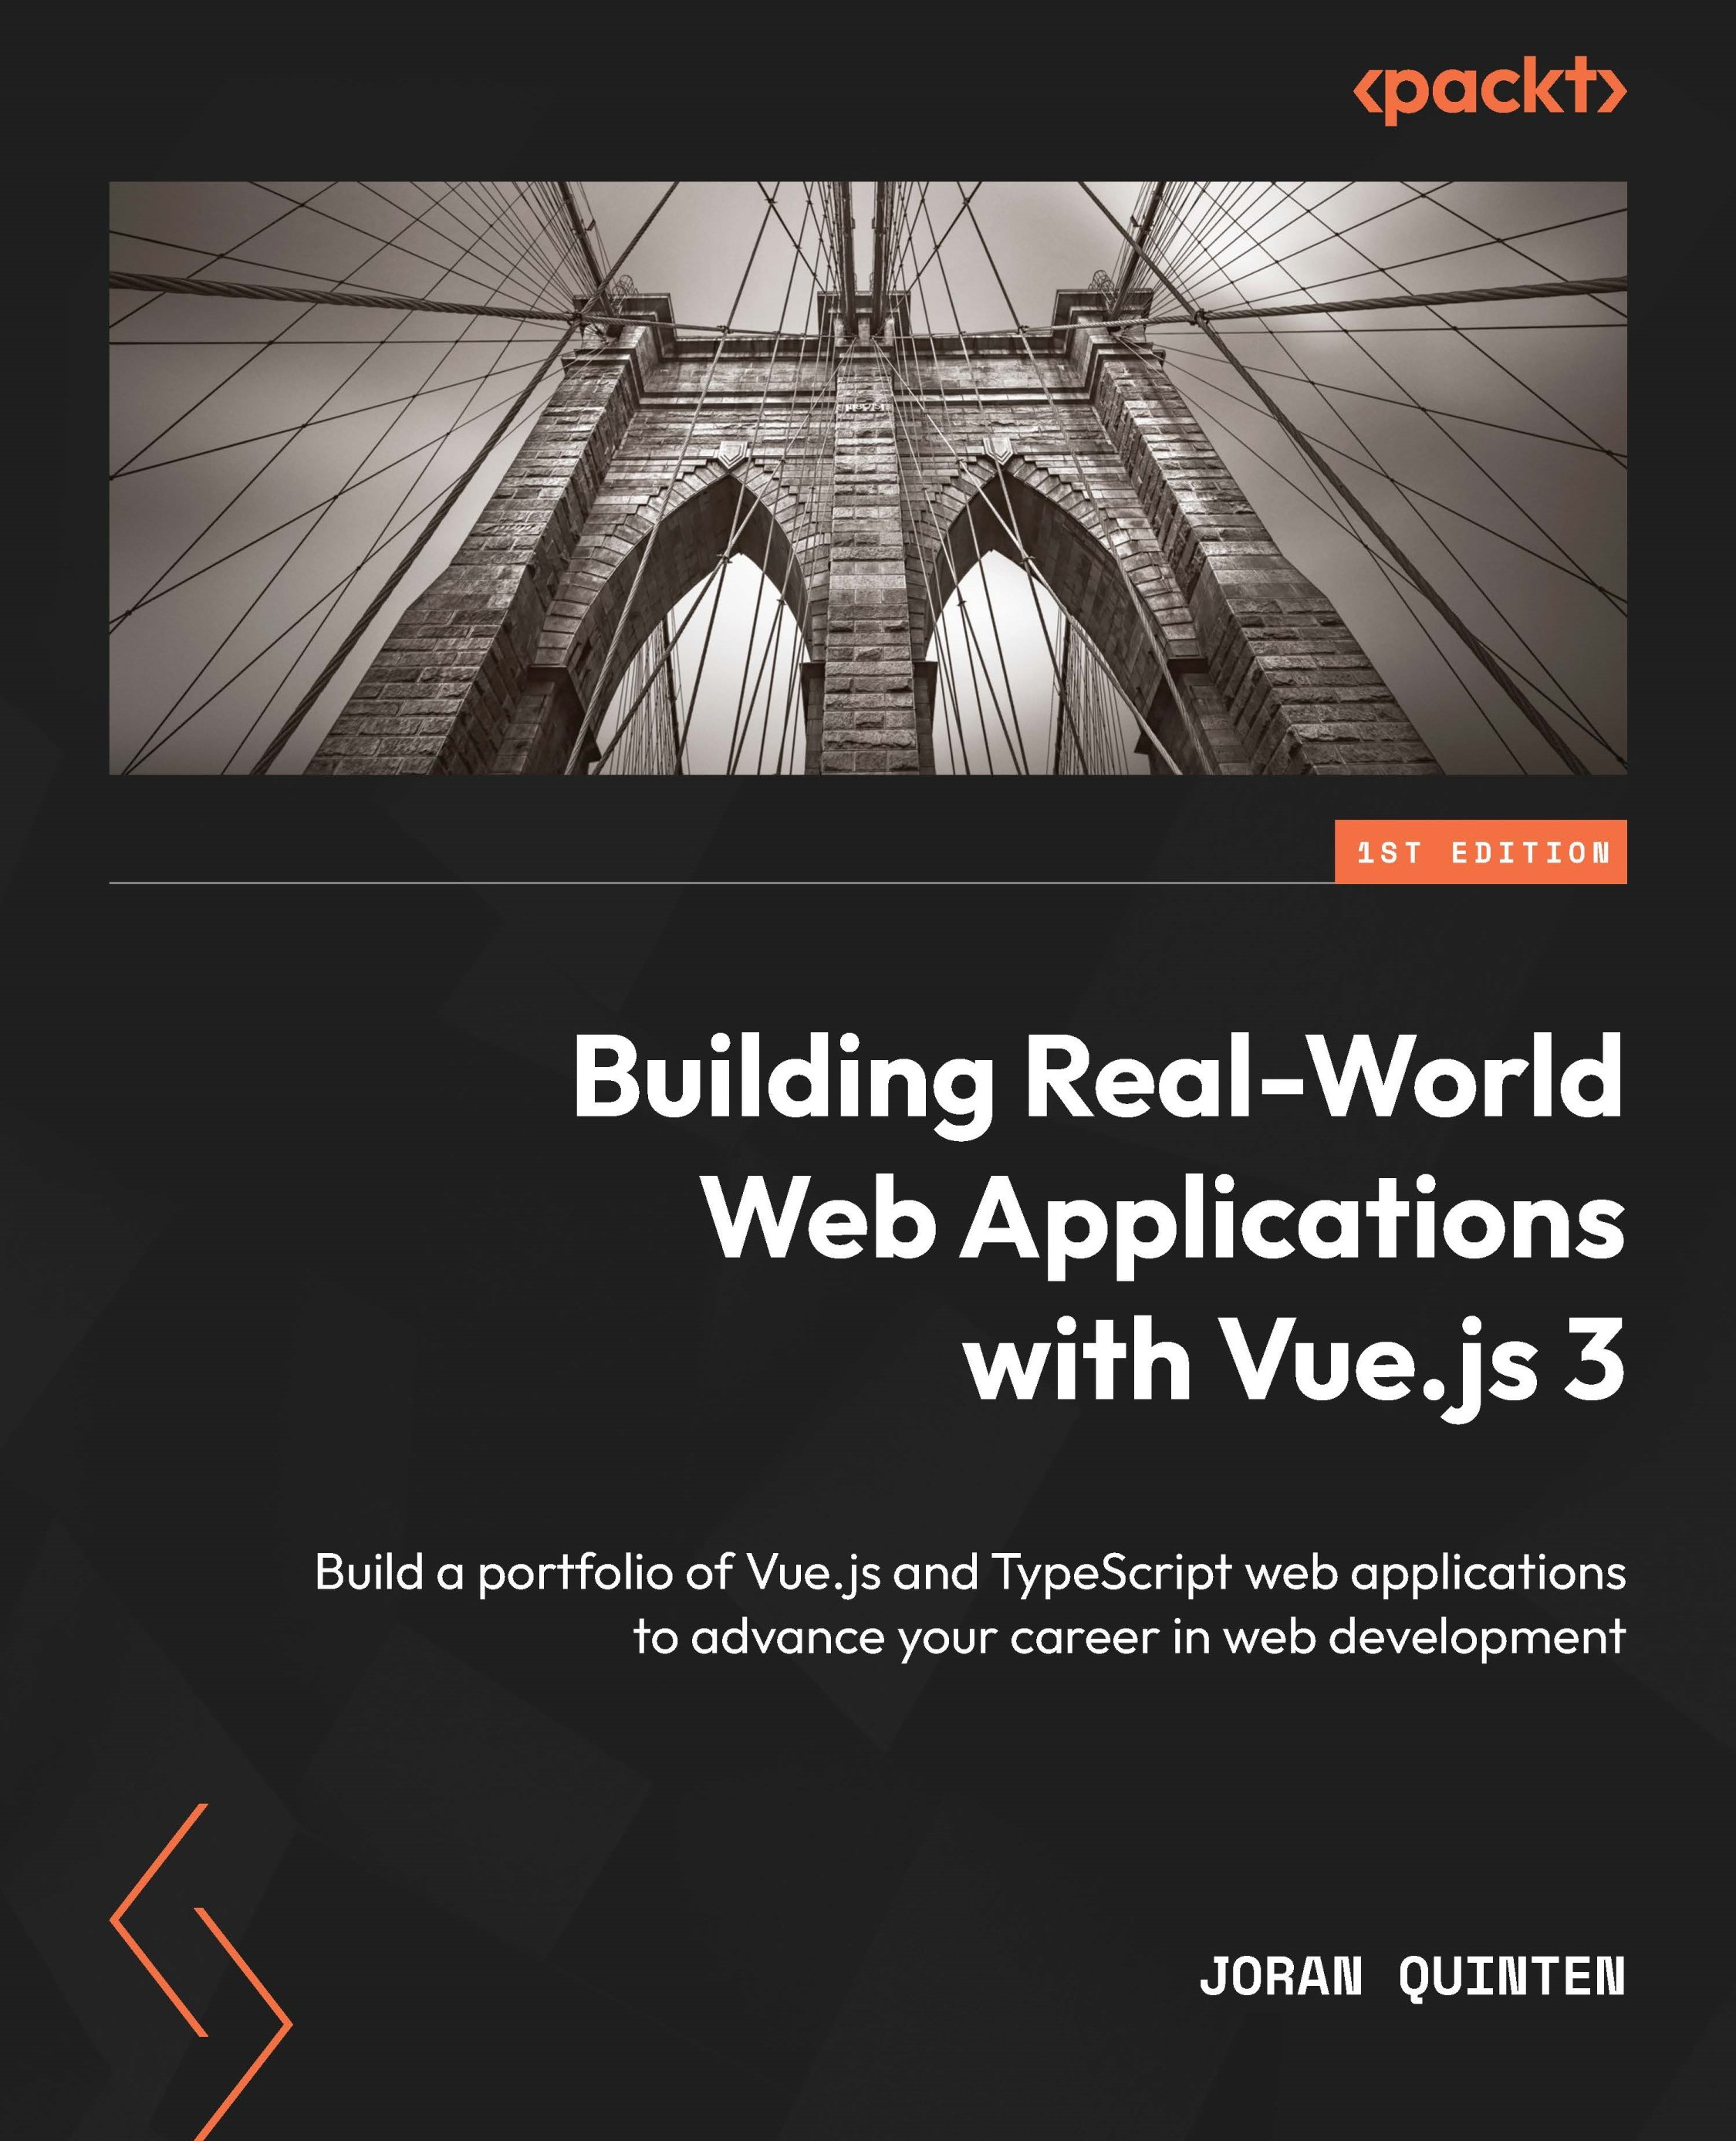 Building Real-World Web Applications with Vue.js 3: Build a portfolio of Vue.js and TypeScript web applications to advance your career in web development